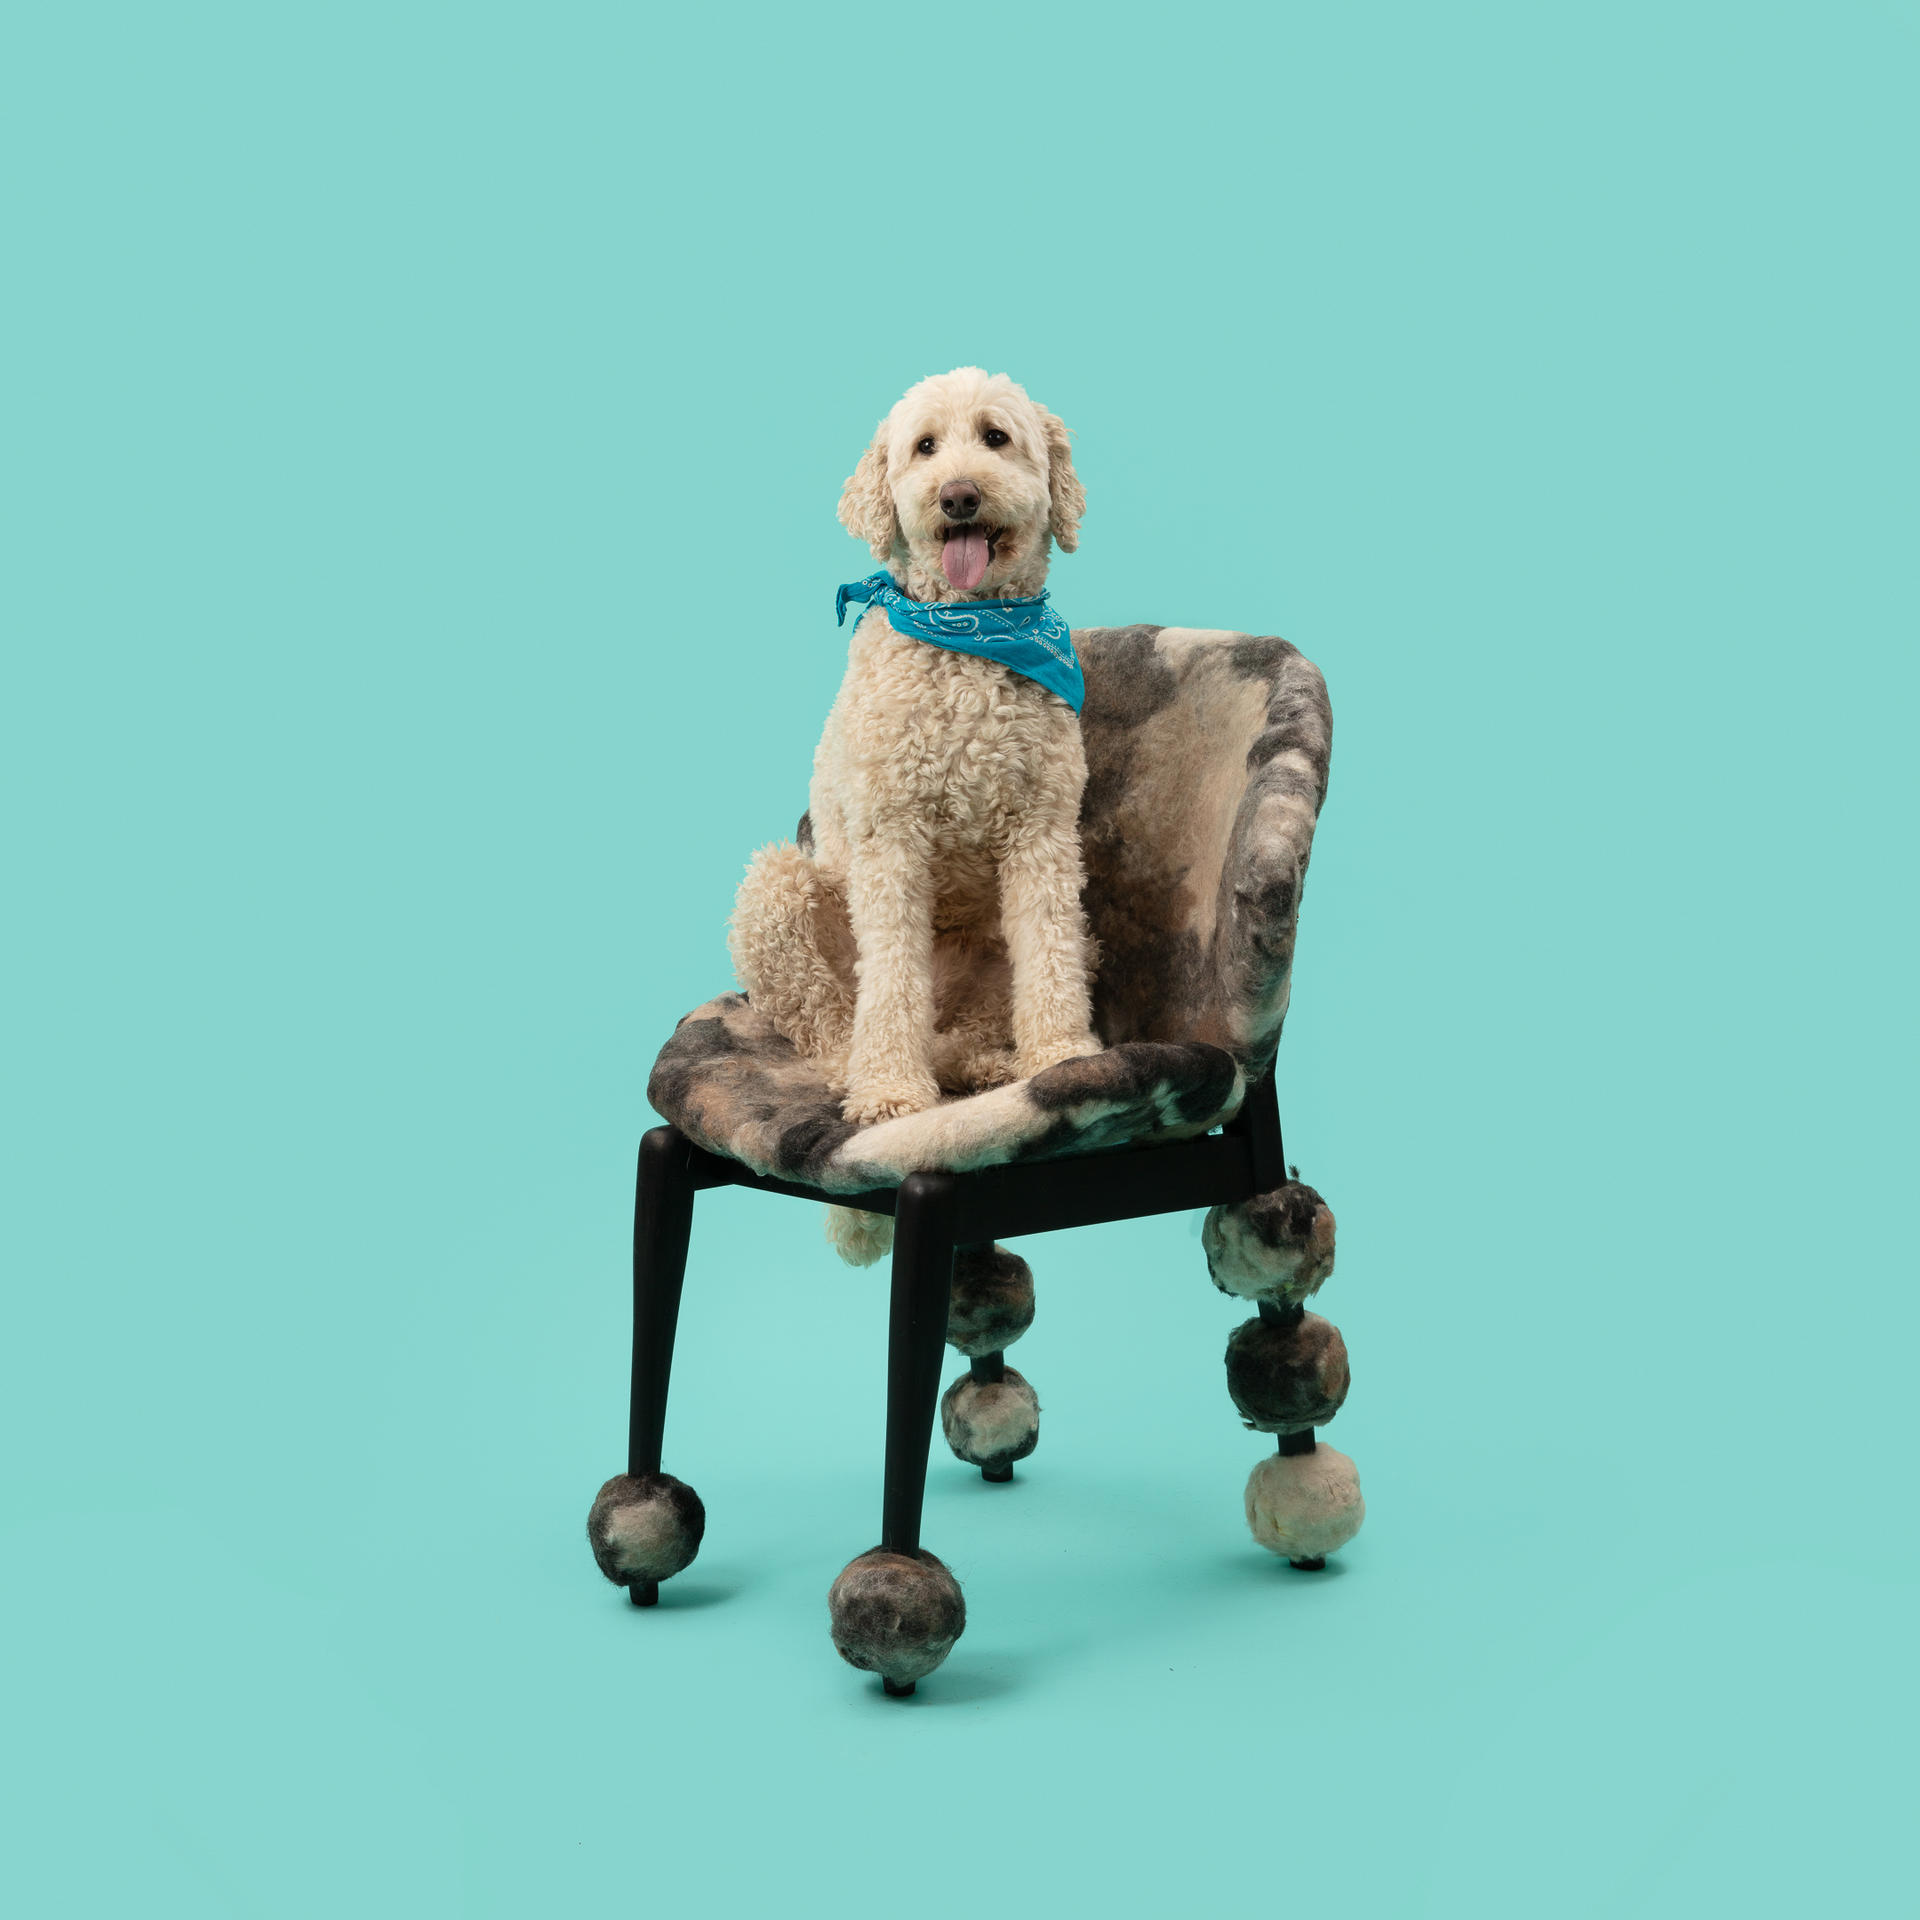 Wooden chair upholstered with handmade felt made from dog hair.